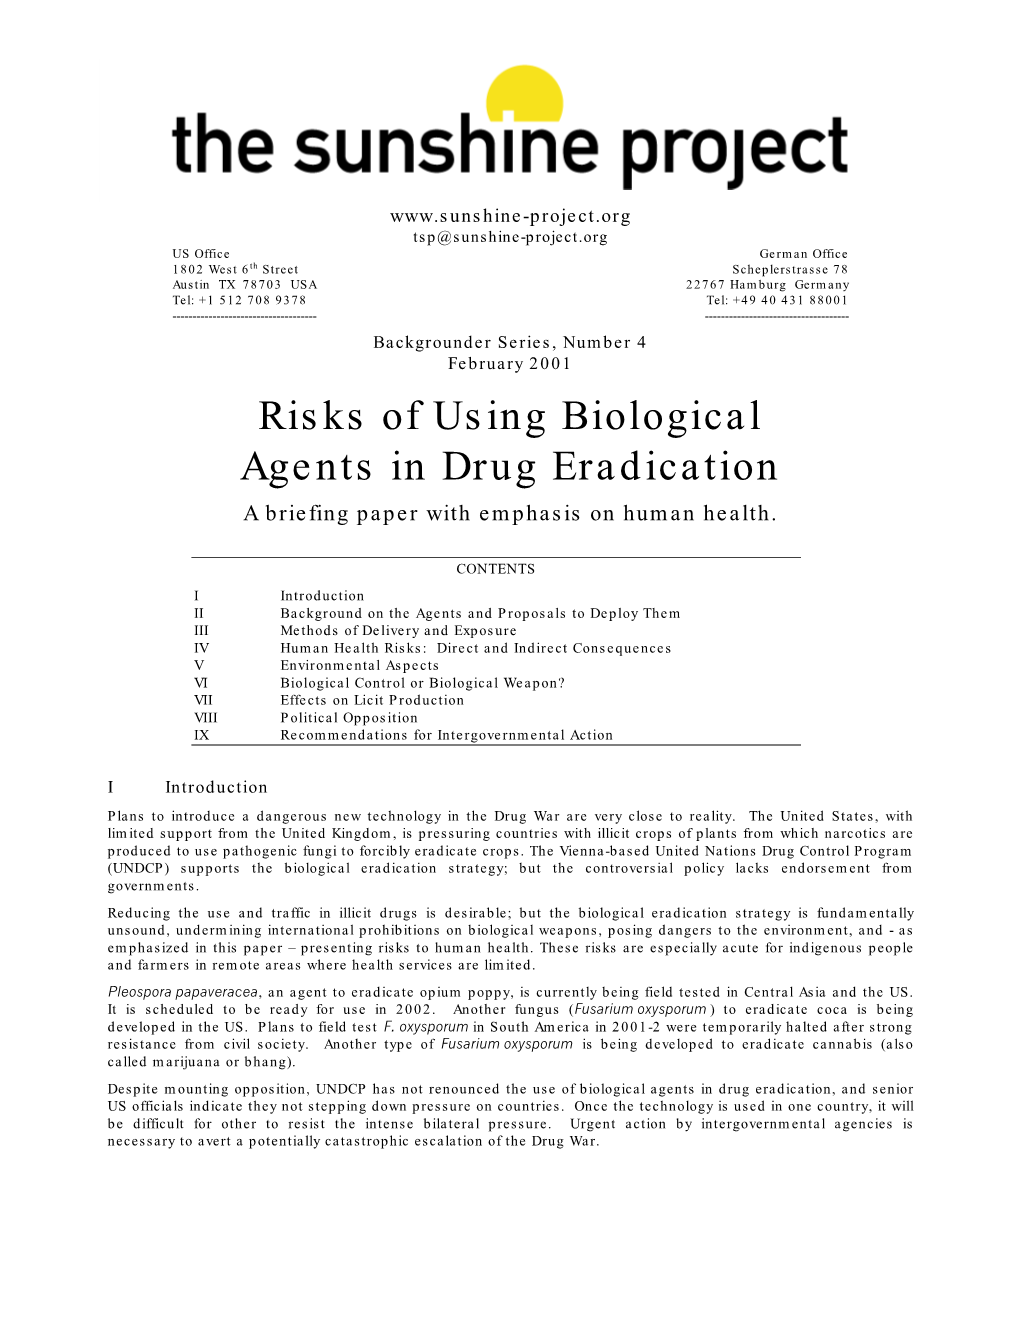 Risks of Using Biological Agents in Drug Eradication a Briefing Paper with Emphasis on Human Health